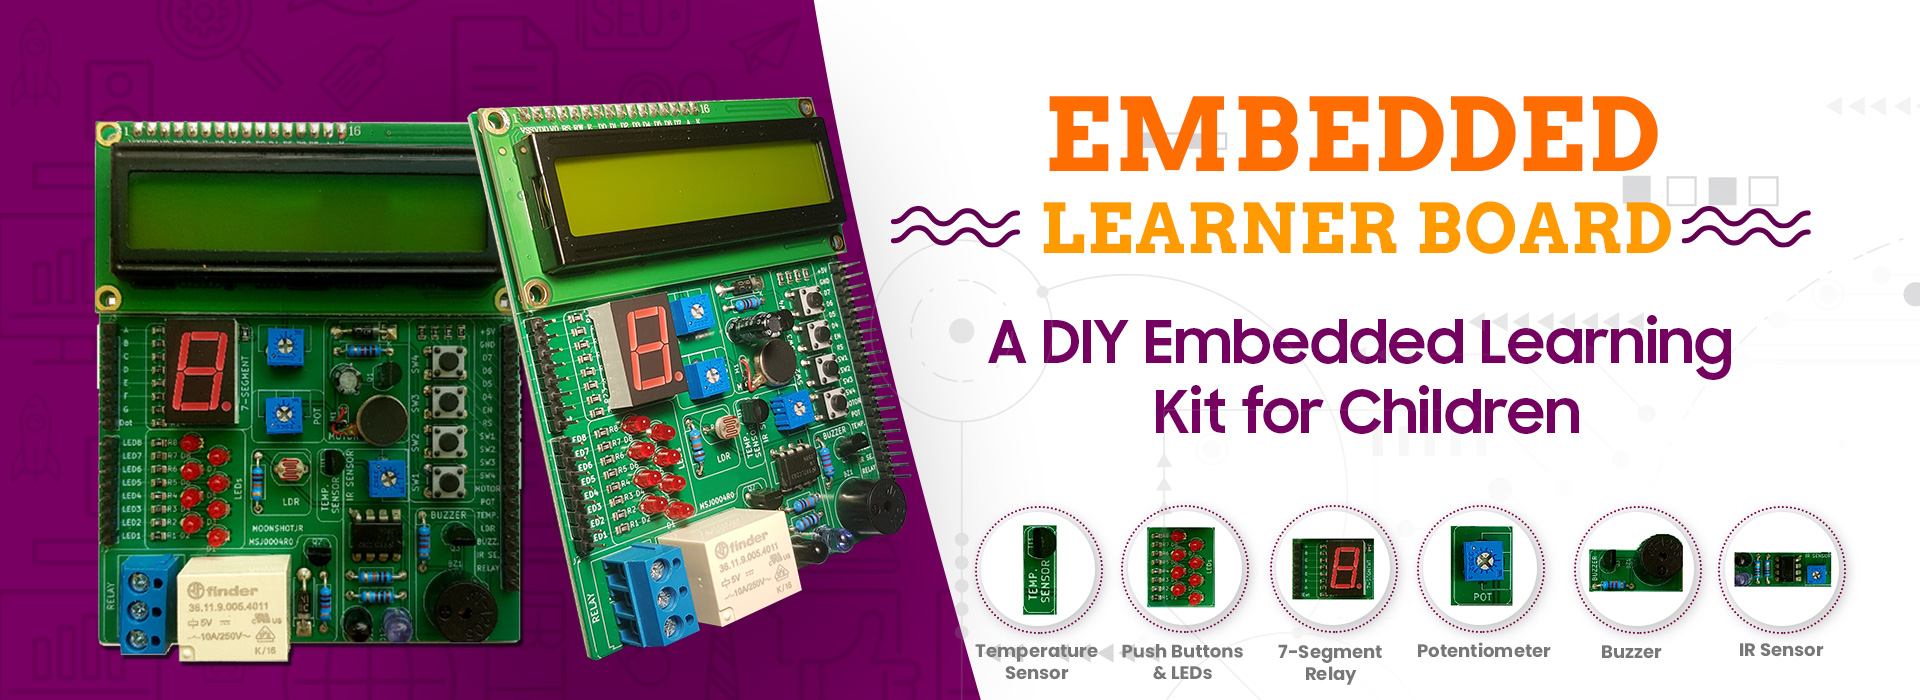 Embedded Learner Board features and codes